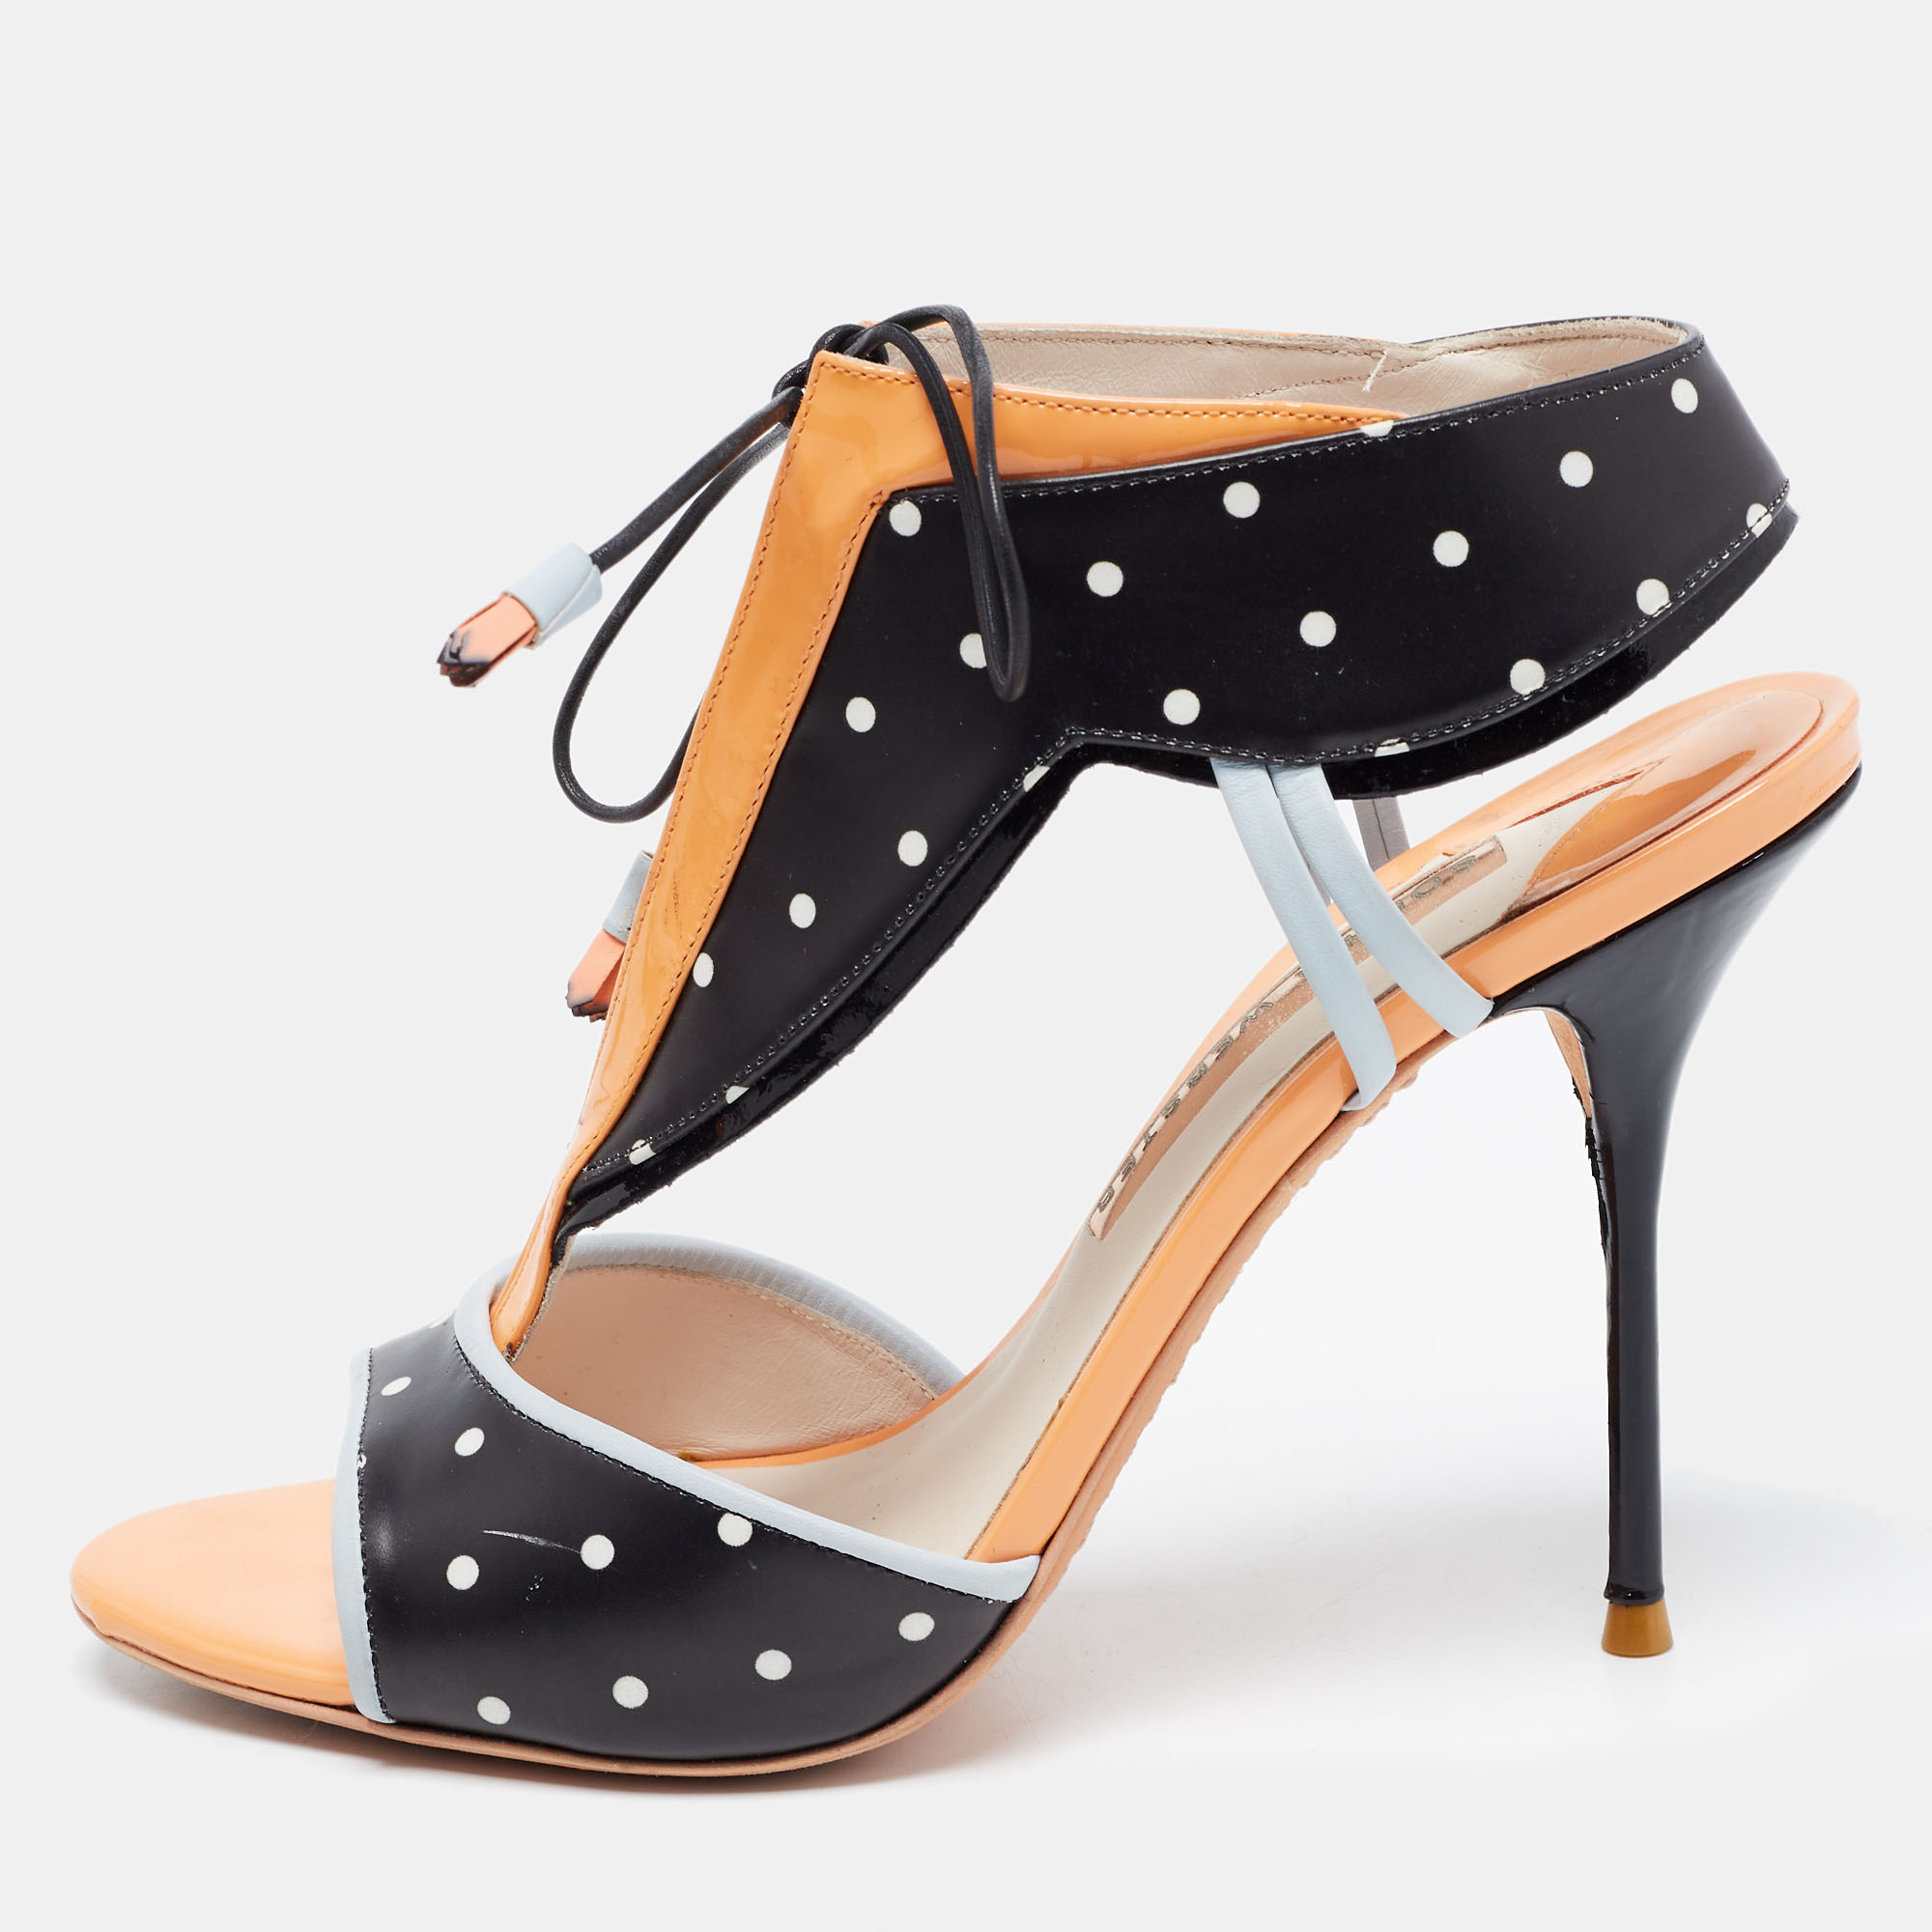 Sophia Webster Tricolor Polka Dot Leather And Patent Leilou Sandals Size 38